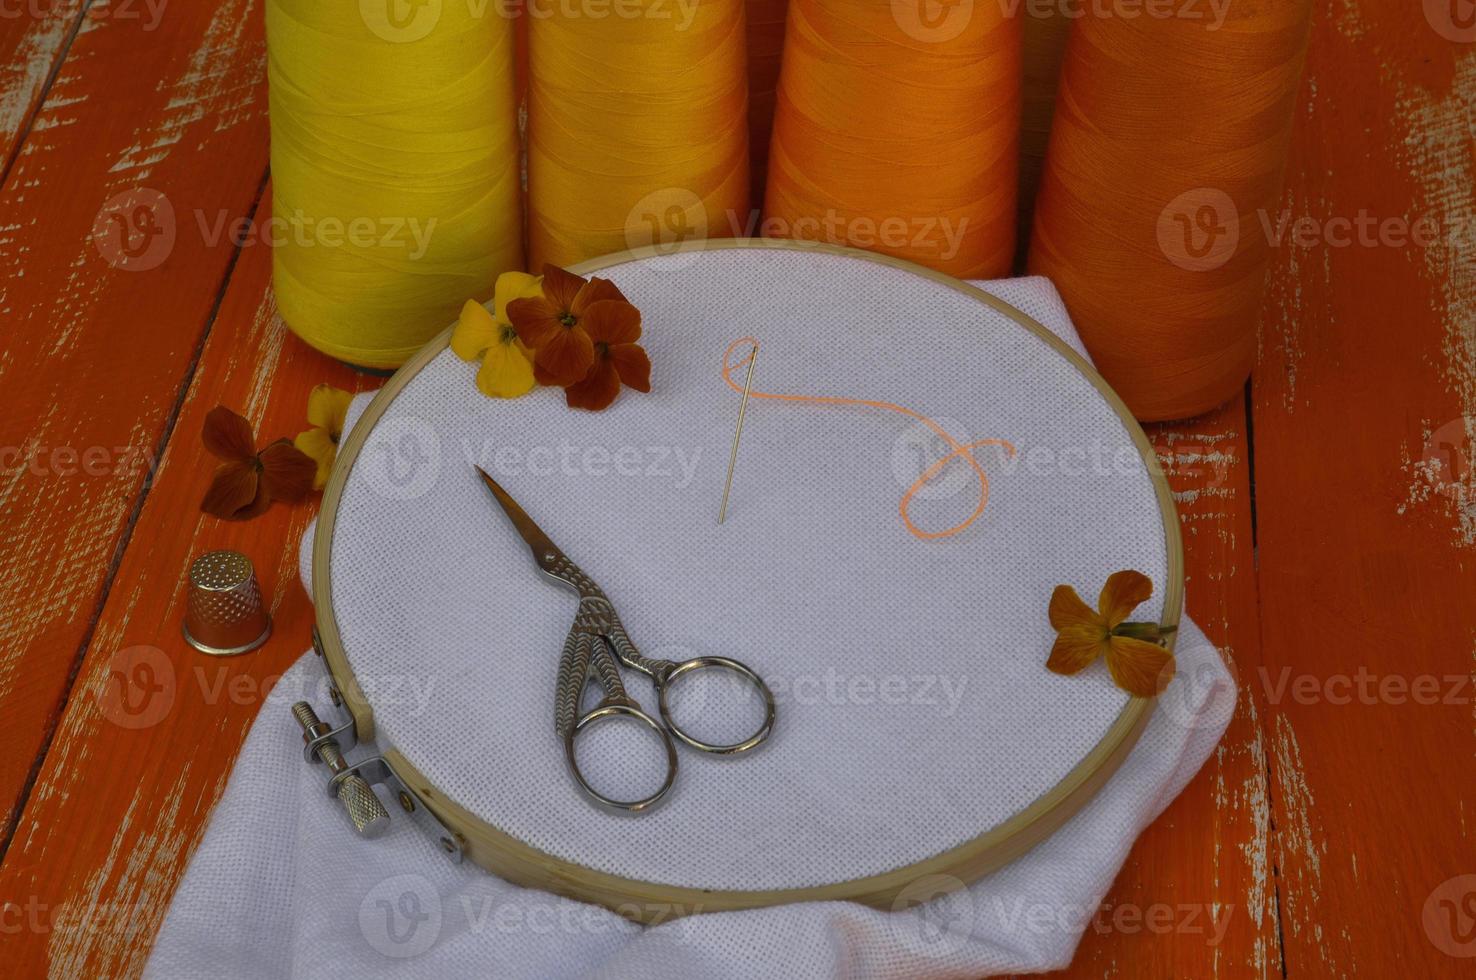 Items for needlework and embroidery in orange and yellow colors photo